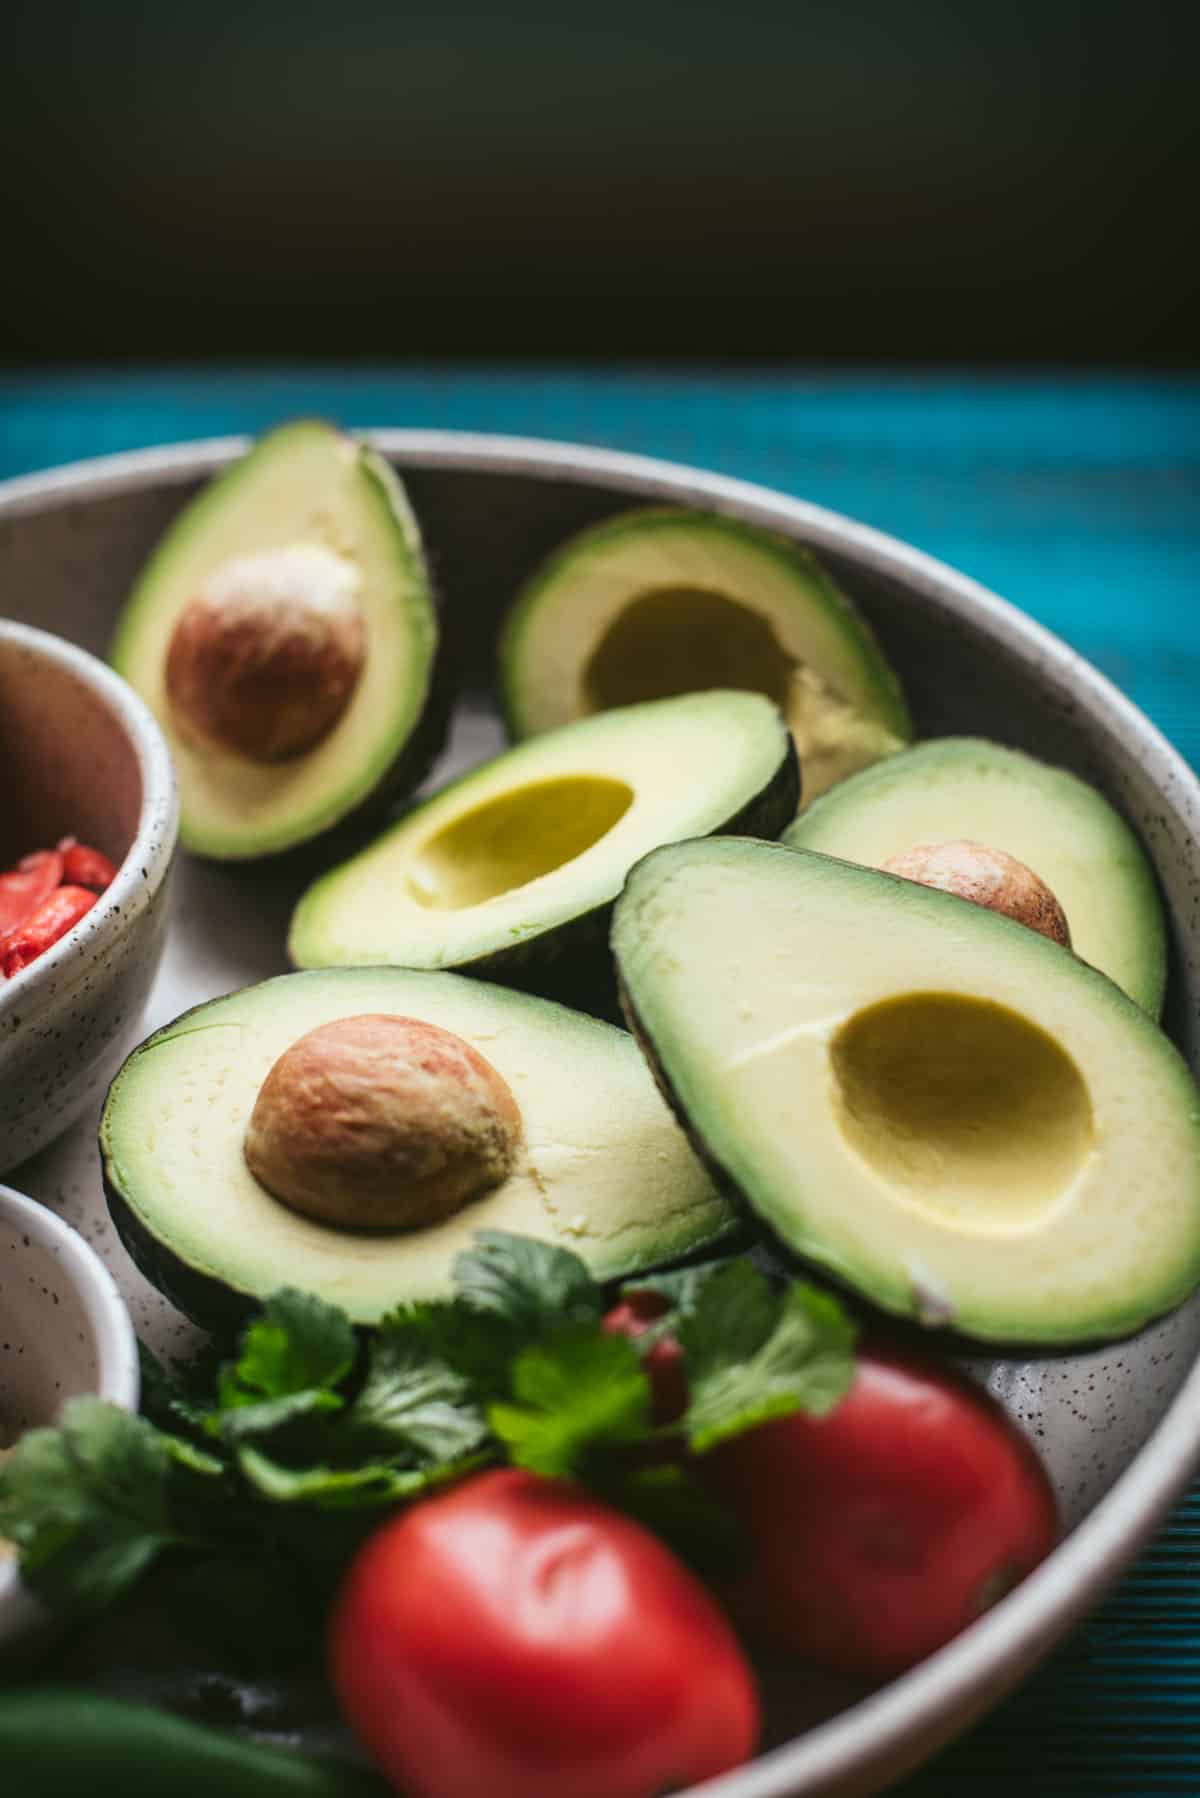 Close up of ingredients, 3 avocados sliced in half, with the seeds still intact inside the avocado half. There are 2 tomatoes and a small hand full of cilantro.